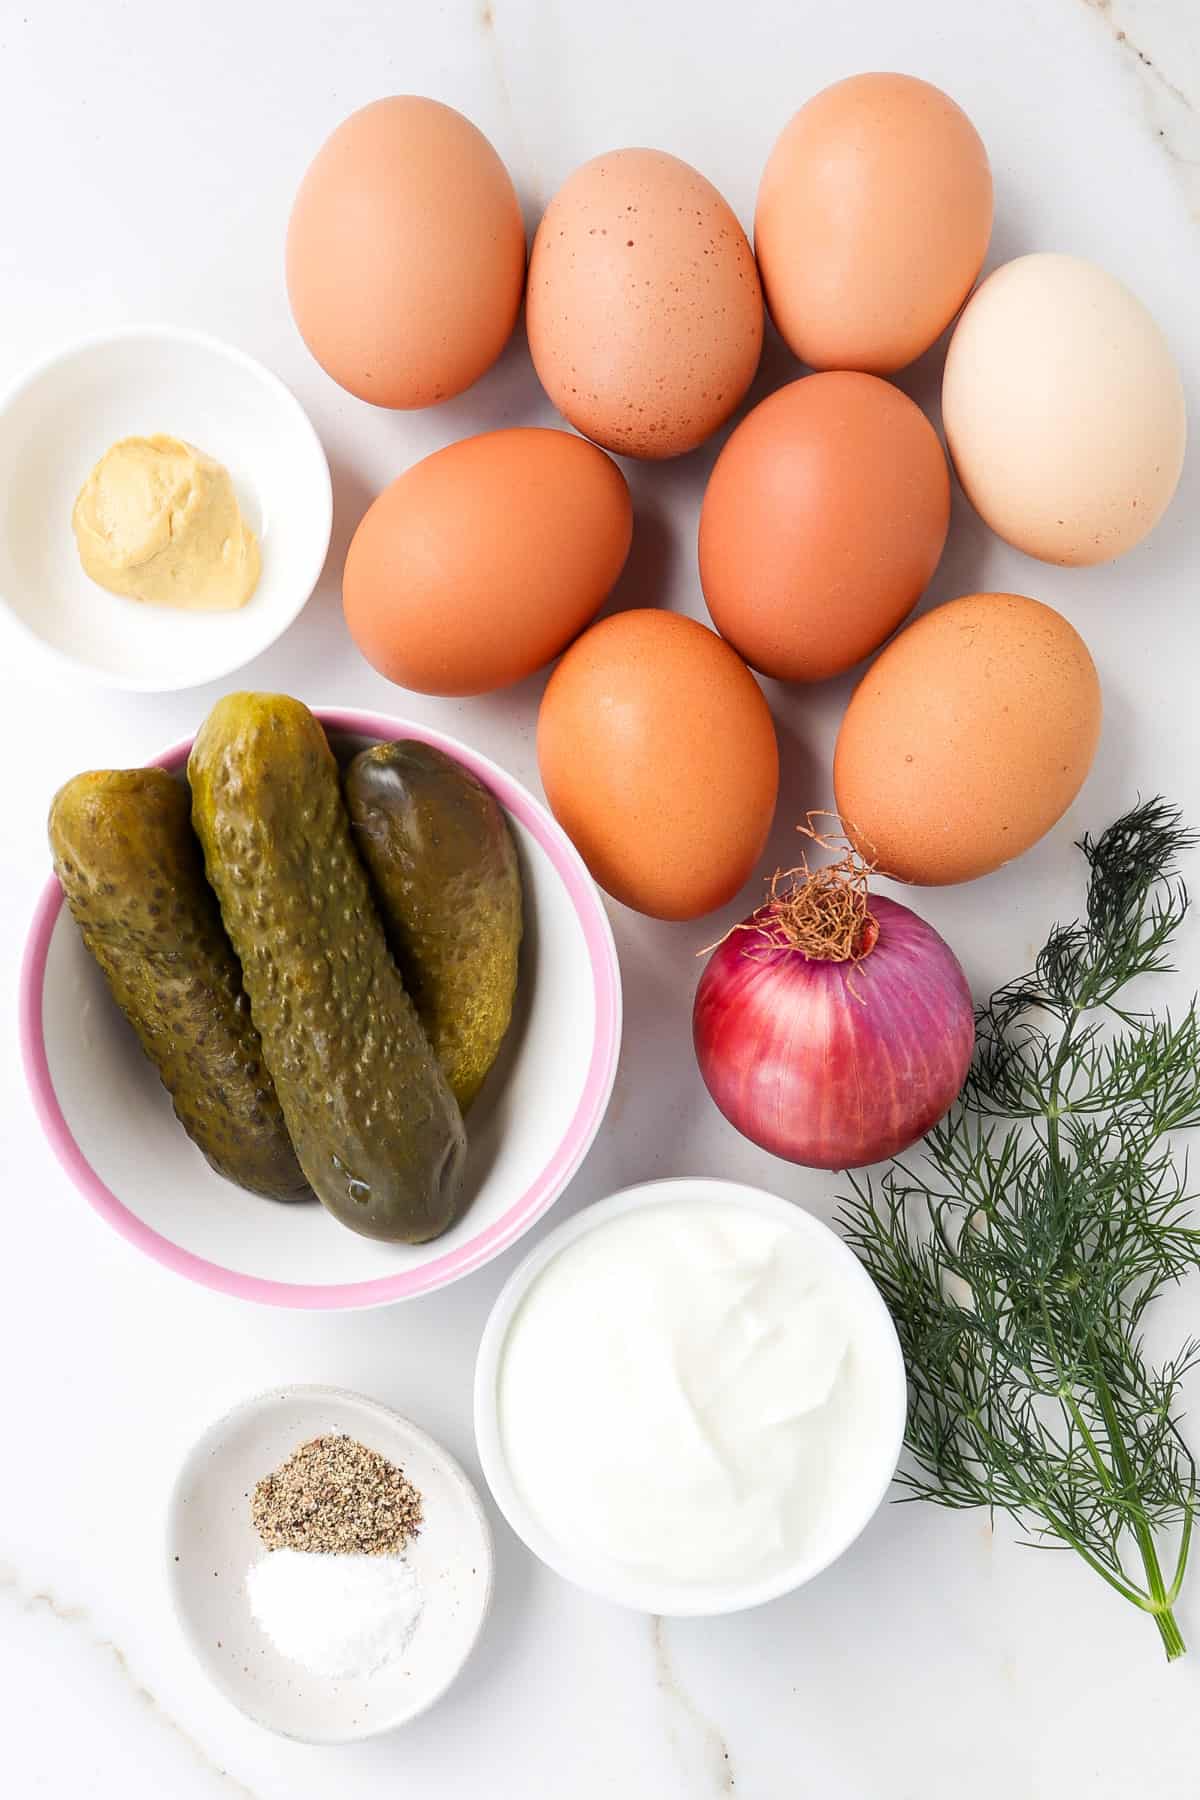 Ingredients shown to make egg salad with pickles.